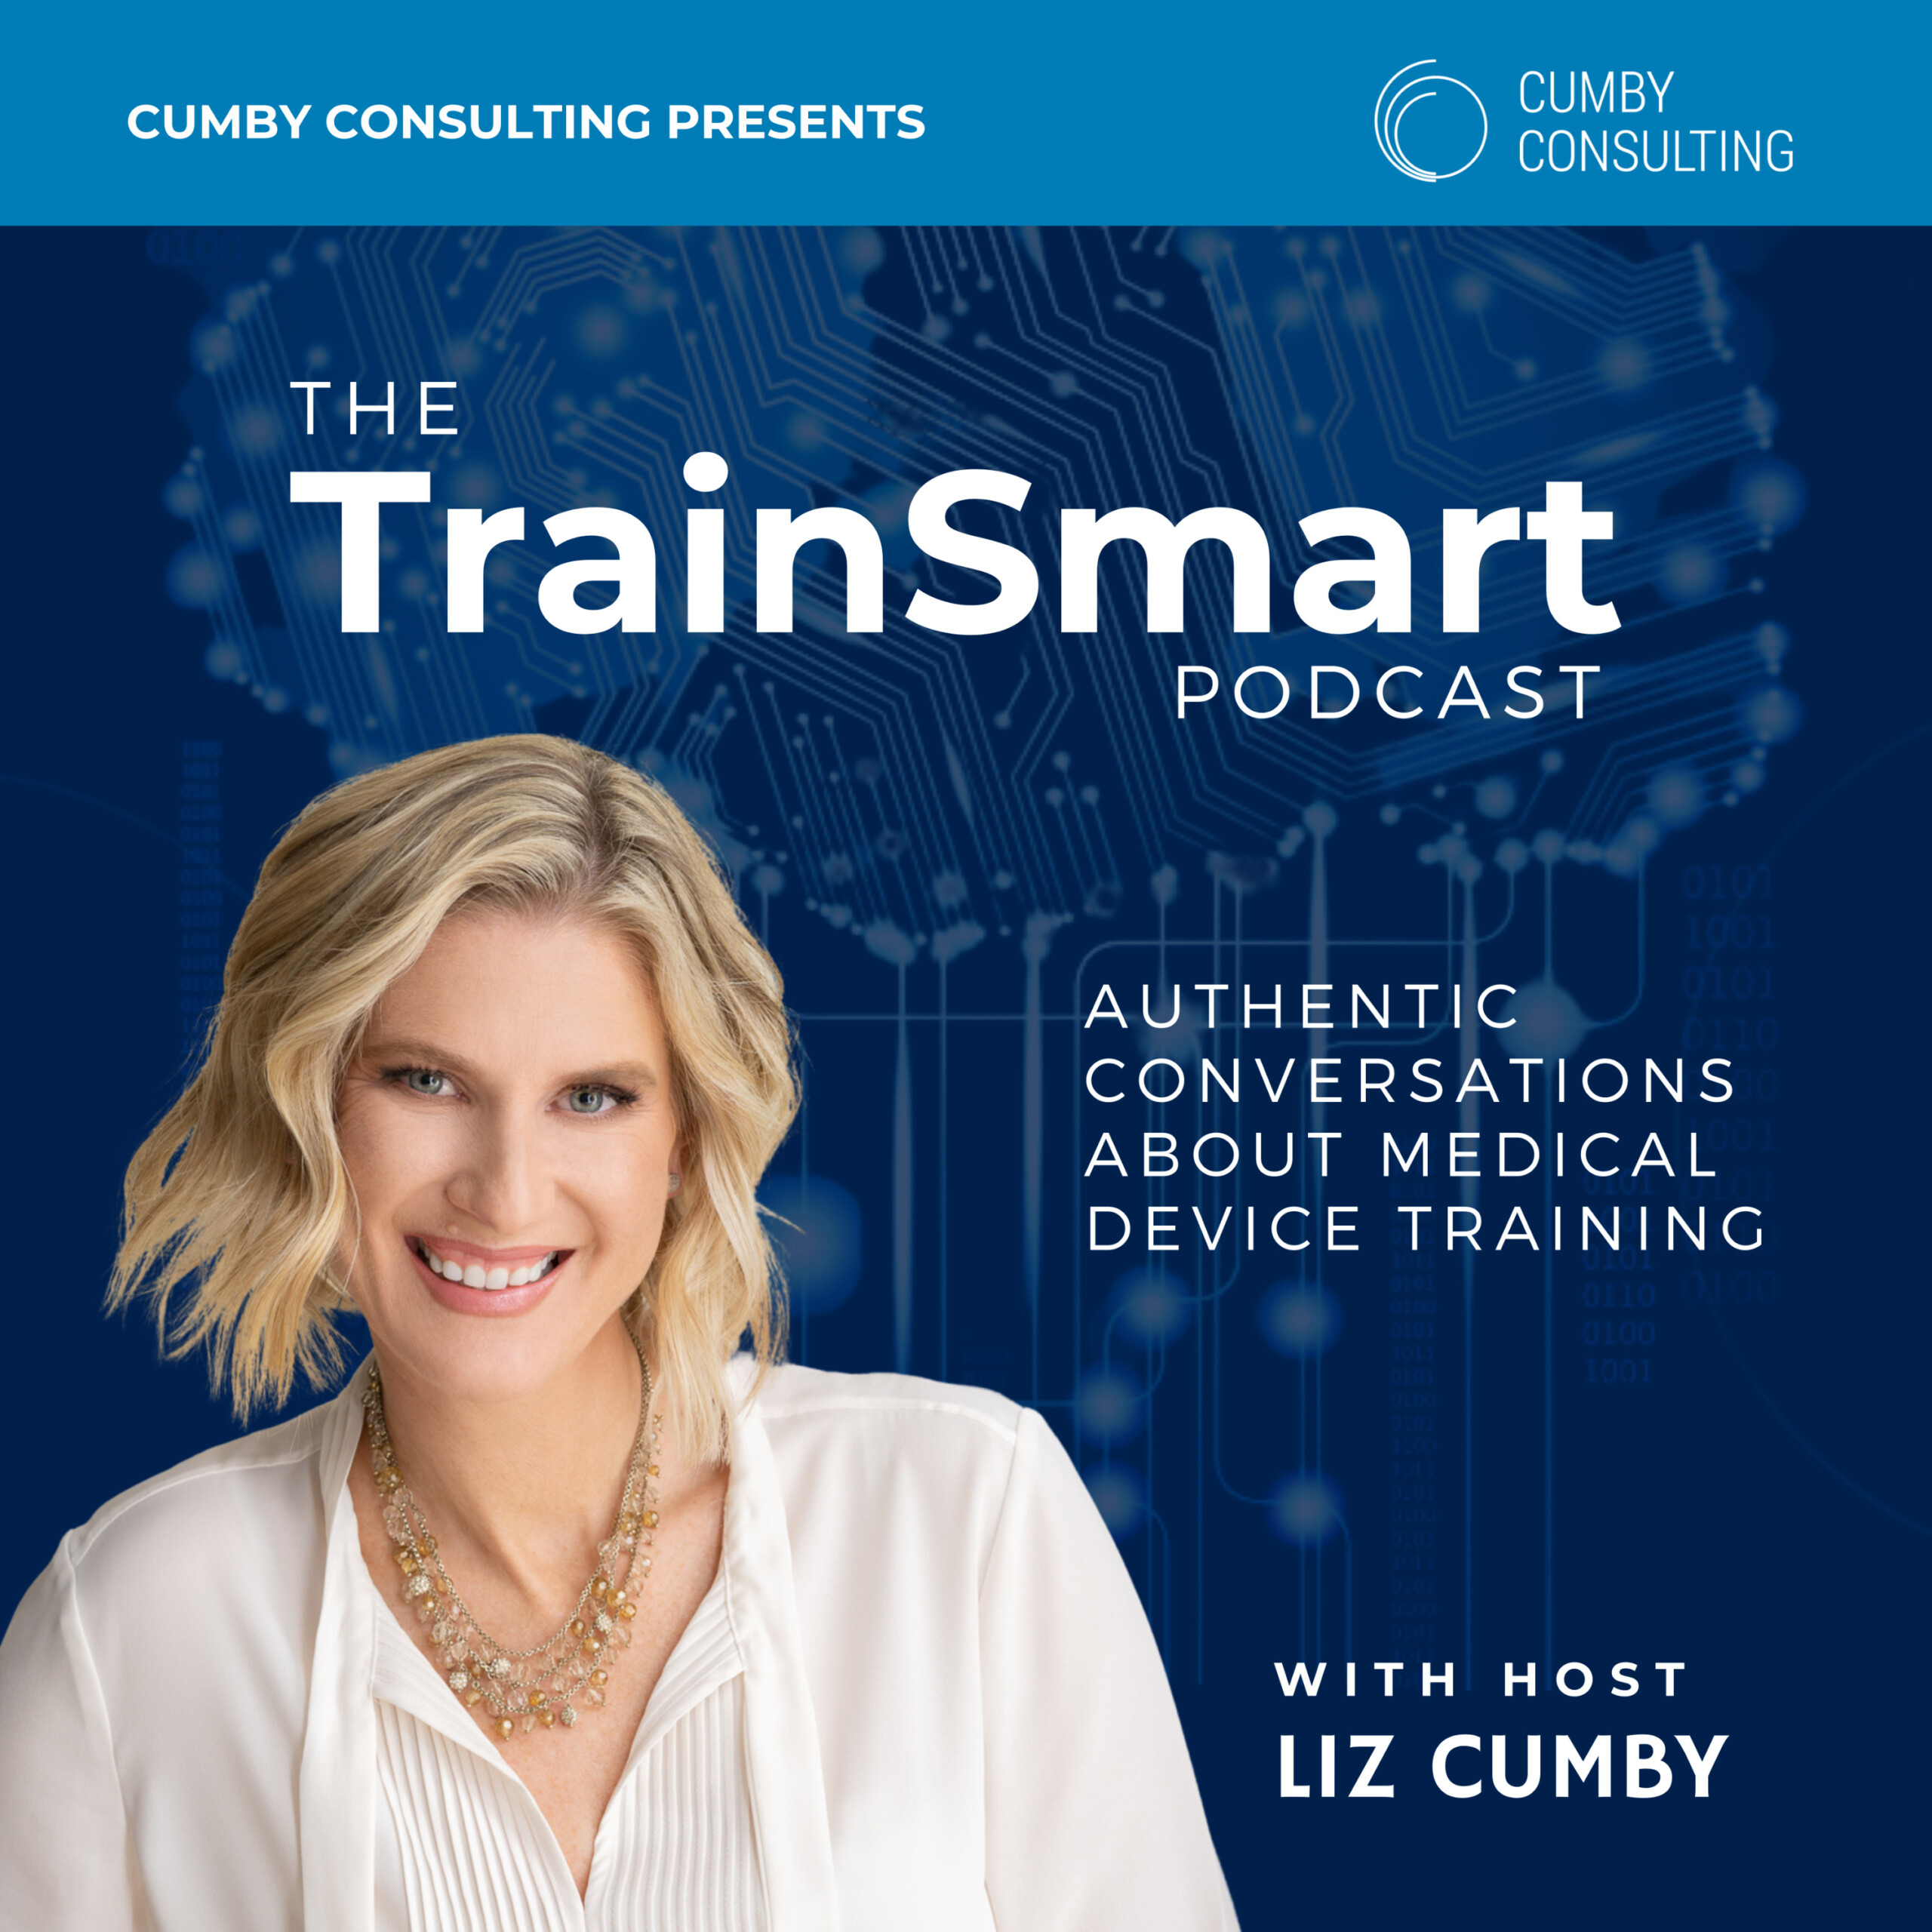 TrainSmart Podcast with Liz Cumby cover art. Liz in white shirt, blue background overlaying brain image